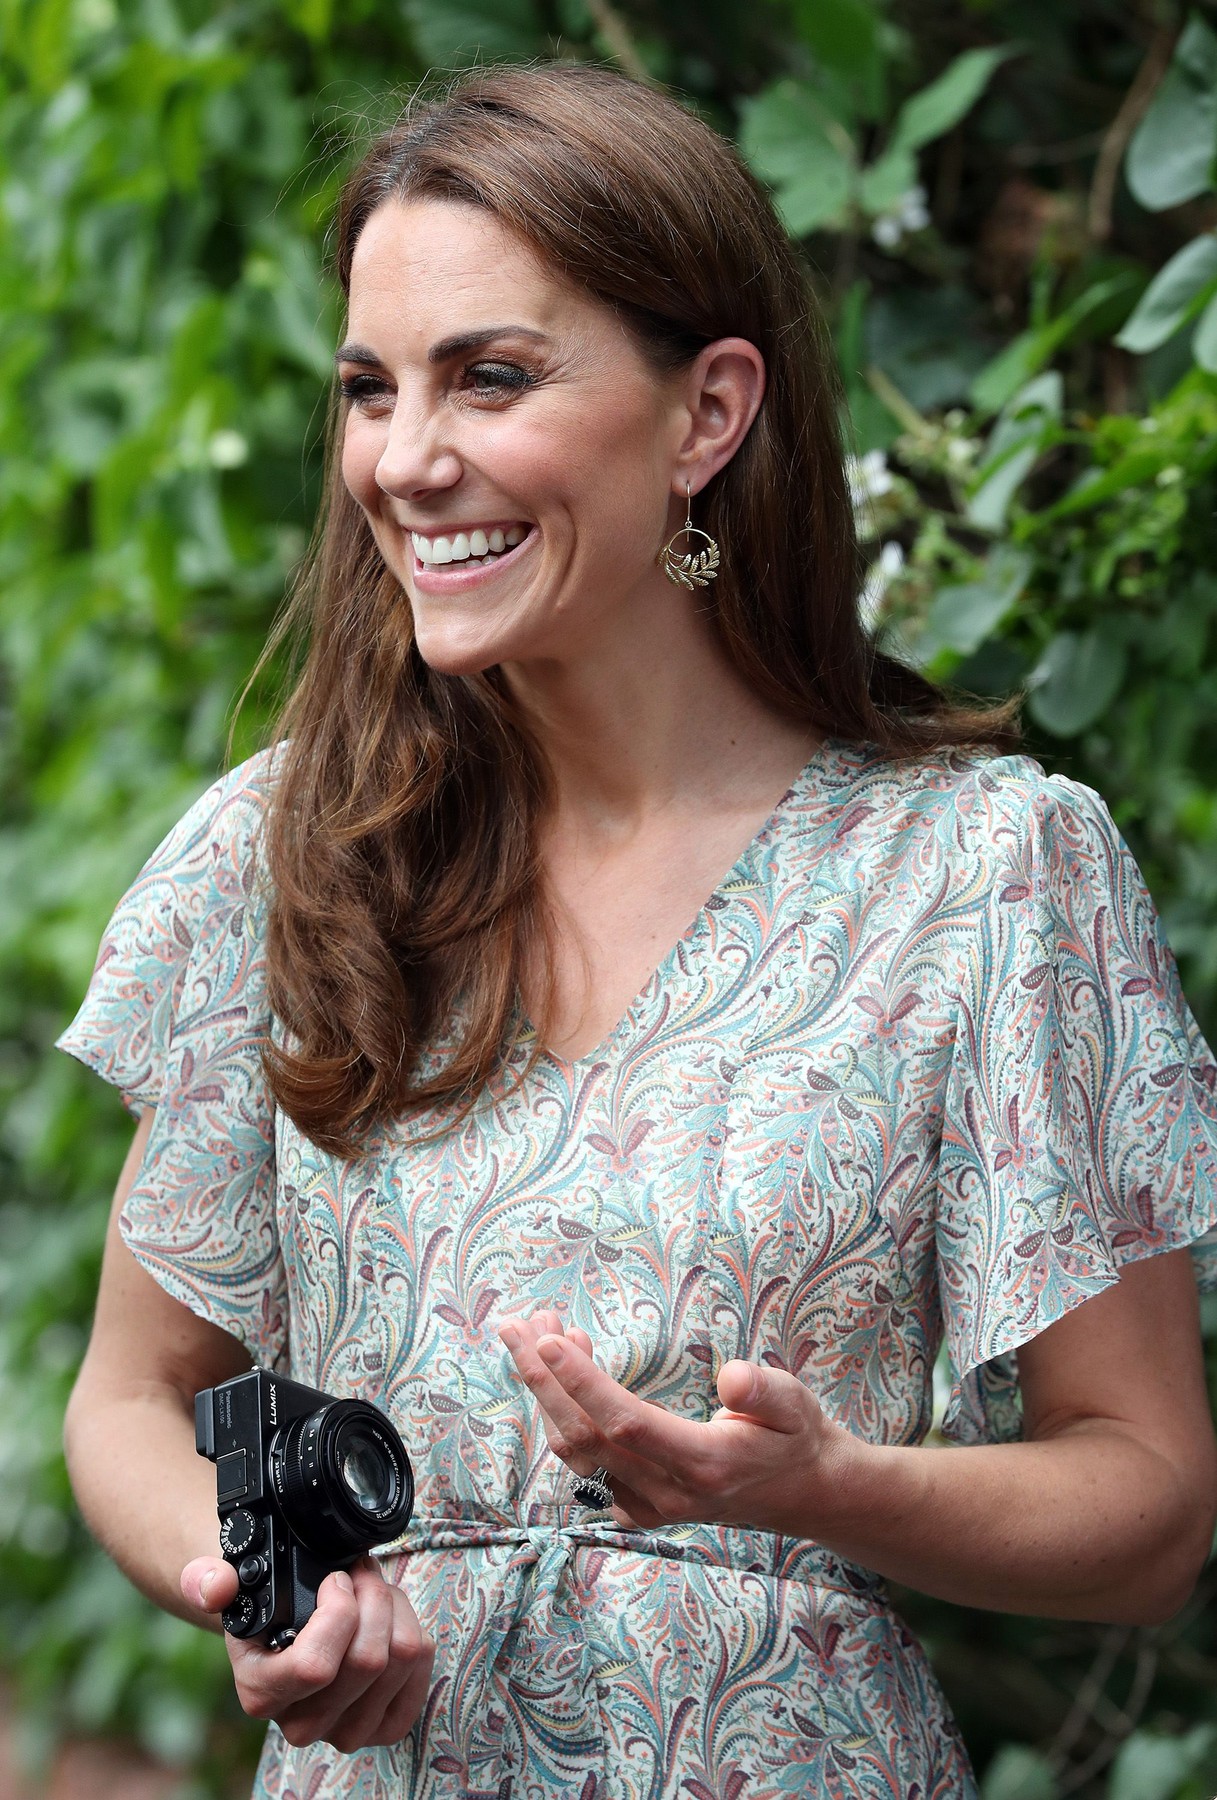 The Duchess of Cambridge joins a photography workshop with Action for Children and the Royal Photographic Society at Warren Park Children's Centre, Kingston Upon Thames, London, UK, on the 25th June 2019.

Picture by Chris Jackson/WPA-Pool//GEORGEROGERS_ROGERS0039/1906260853/Credit:GEORGE ROGERS/SIPA/1906260936, Image: 451620179, License: Rights-managed, Restrictions: , Model Release: no, Credit line: GEORGE ROGERS / Sipa Press / Profimedia